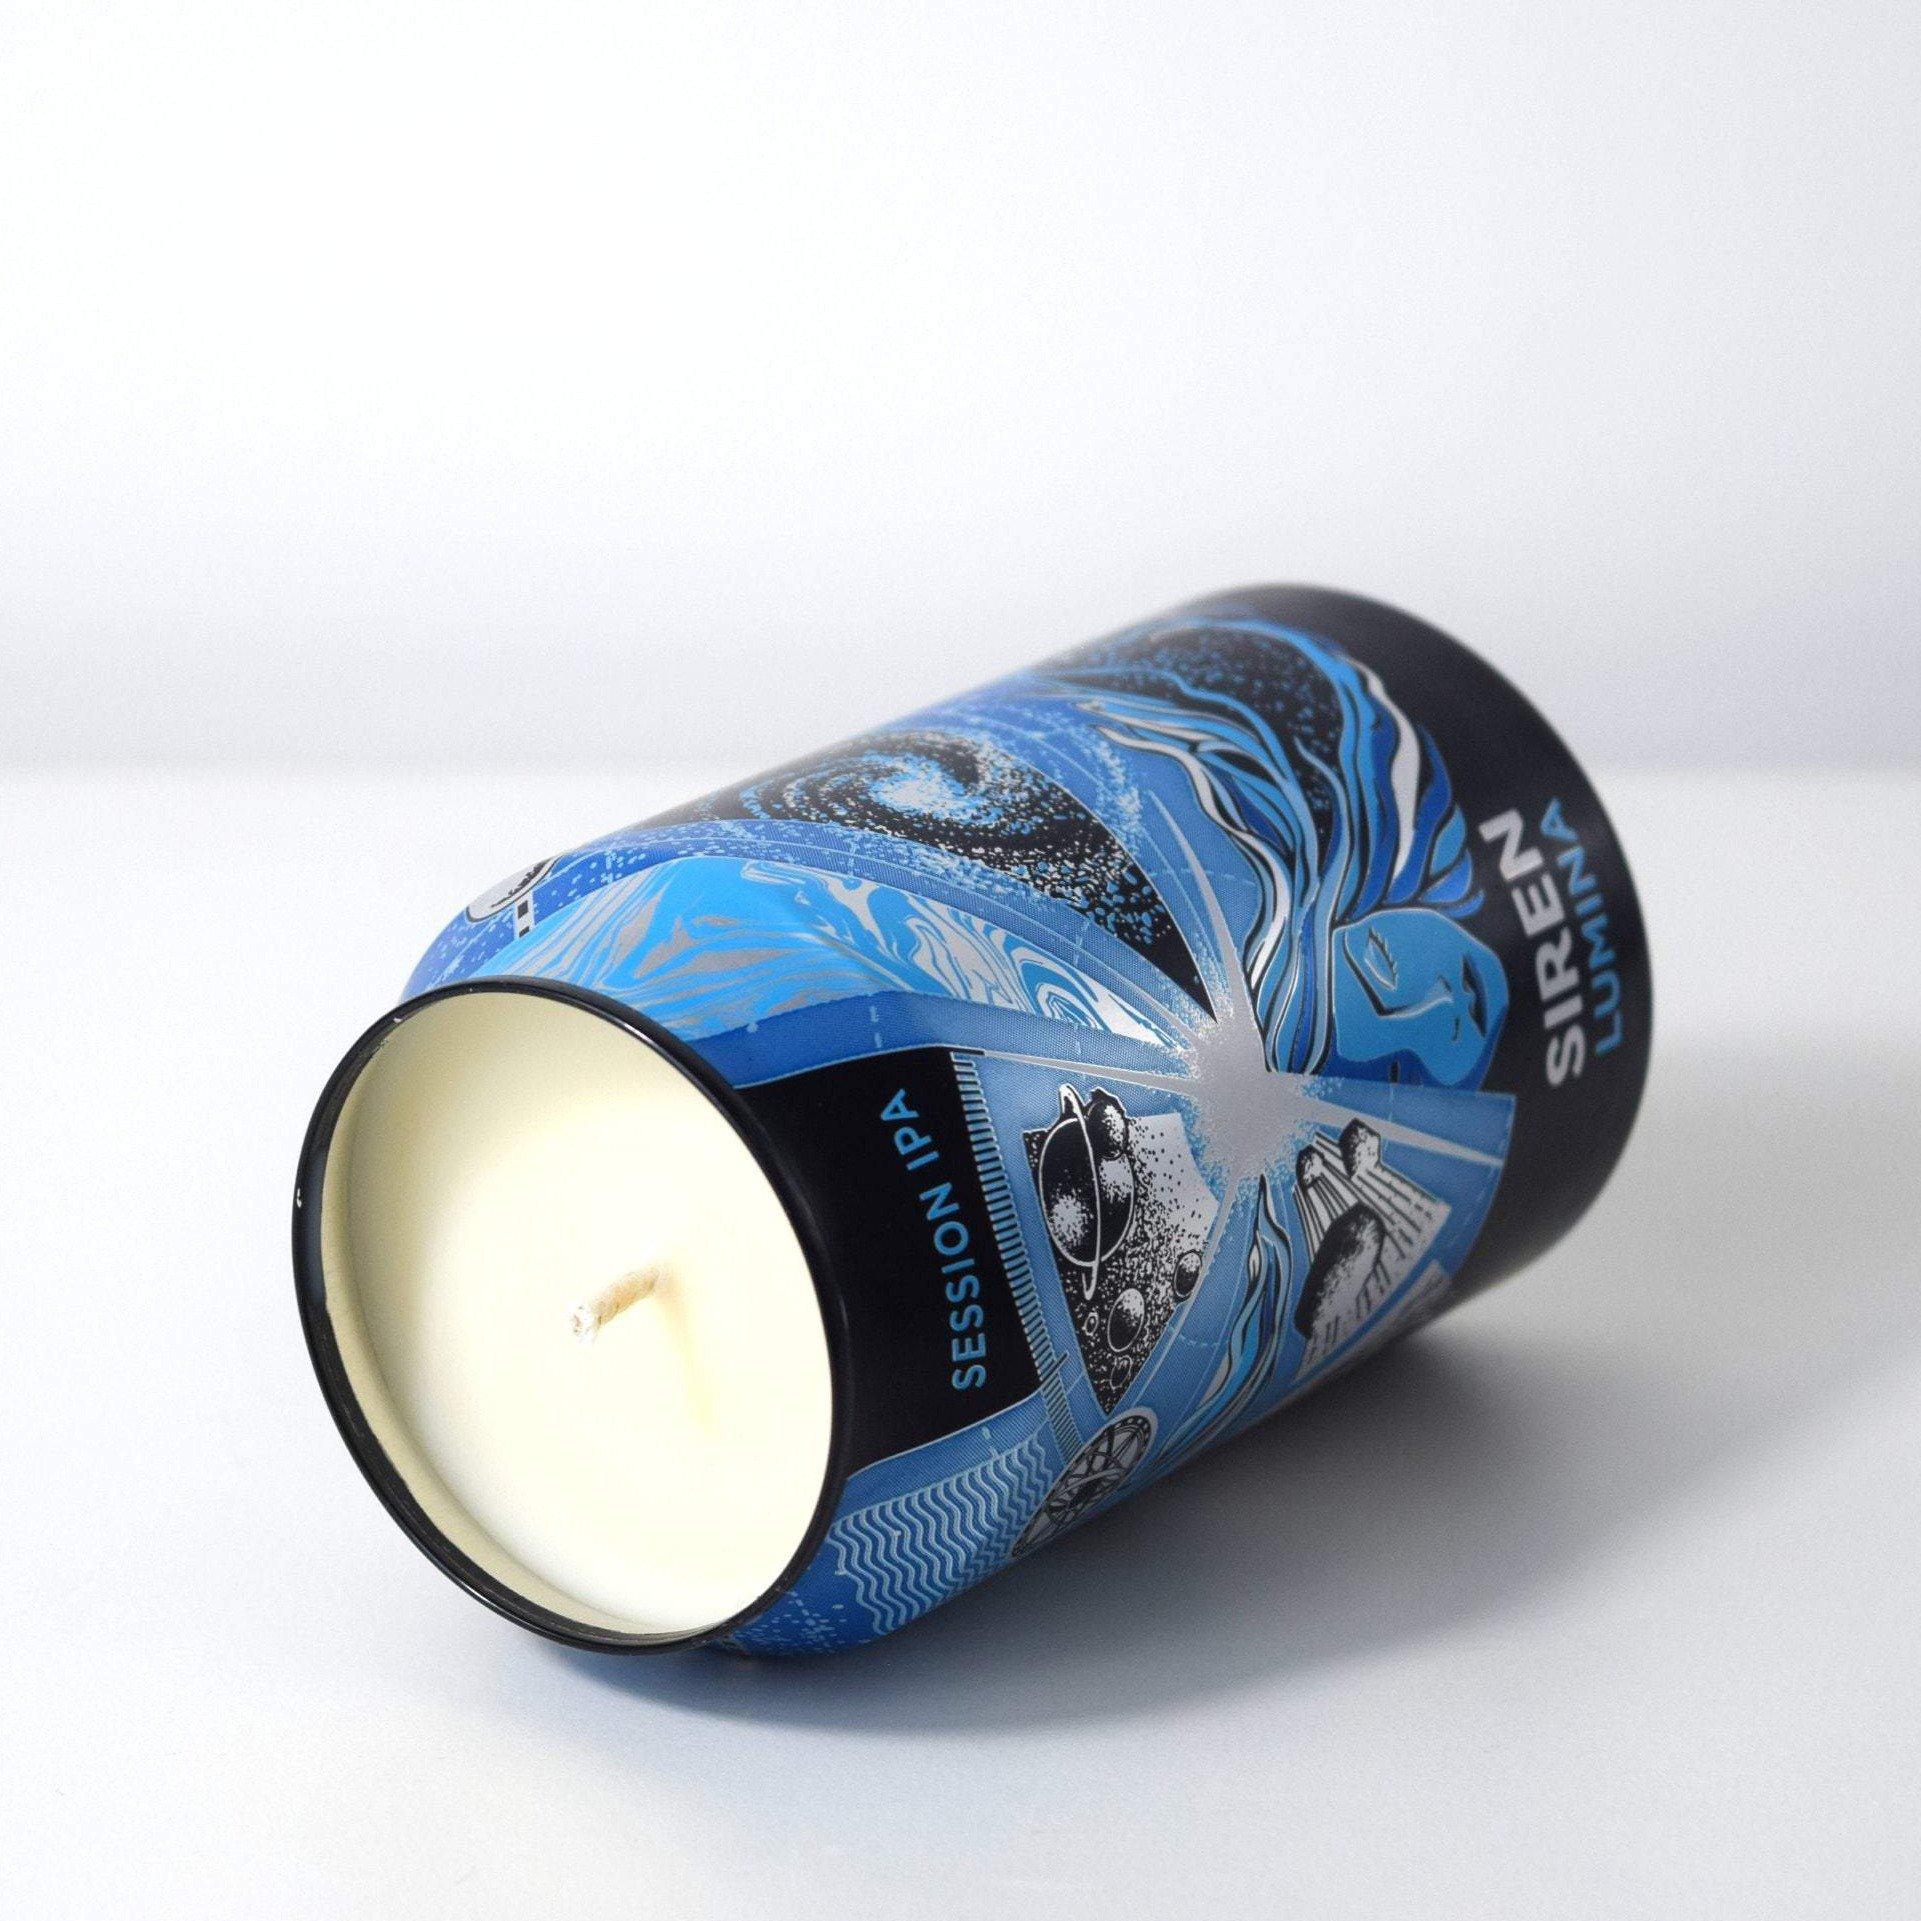 Siren Lumina Session IPA Beer Can Candle-Beer Can Candles-Adhock Homeware